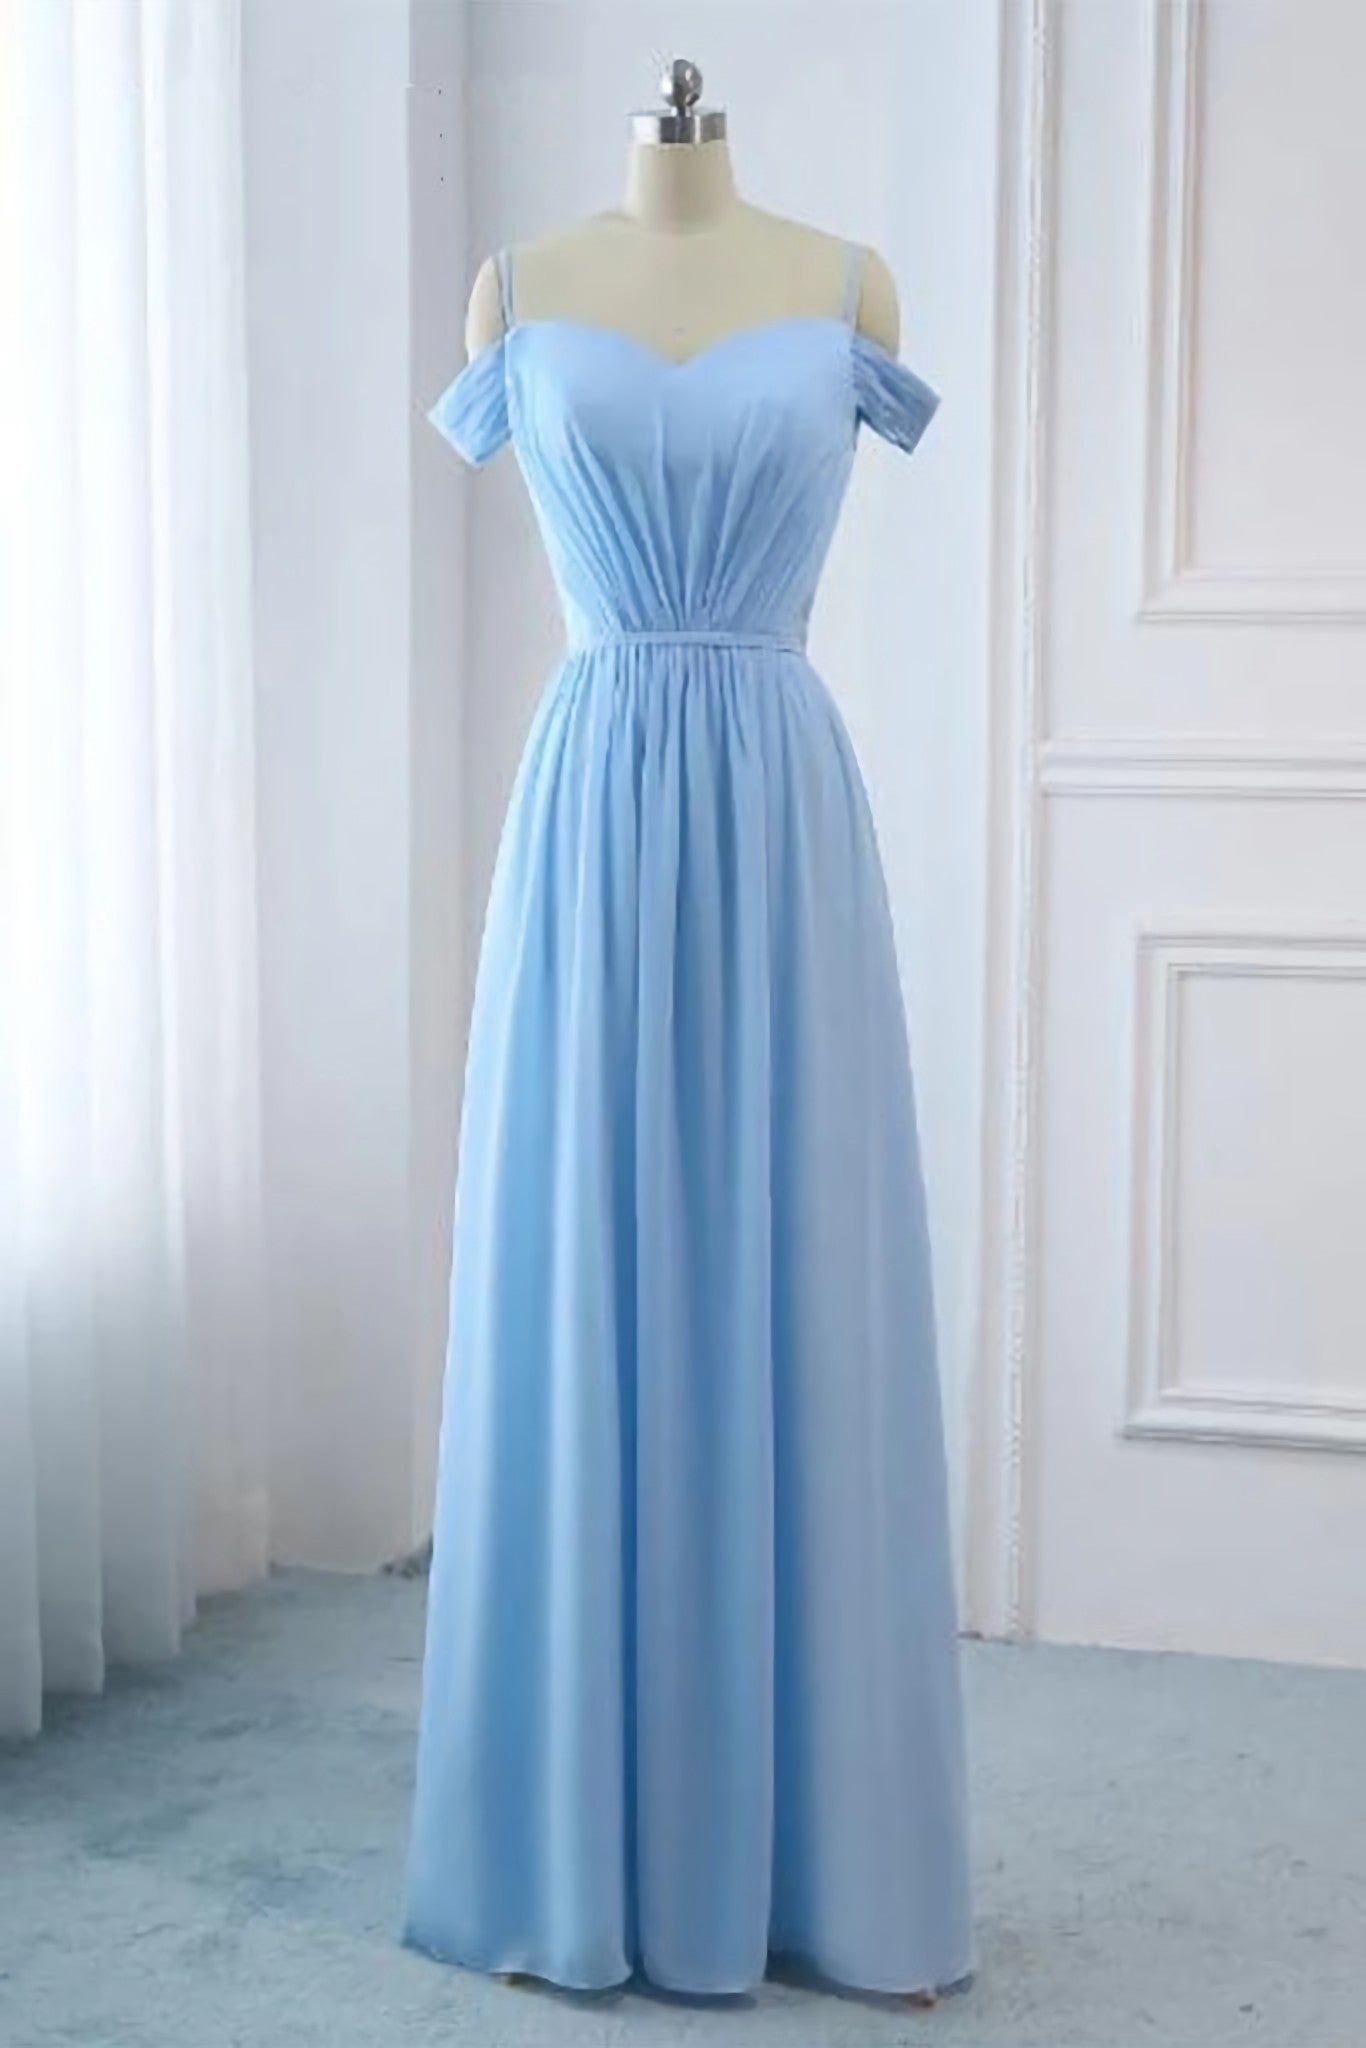 Light Sky Blue A Line Off The Shoulder Natural Waist Ruched Prom Dress, Lace Up Party Dress